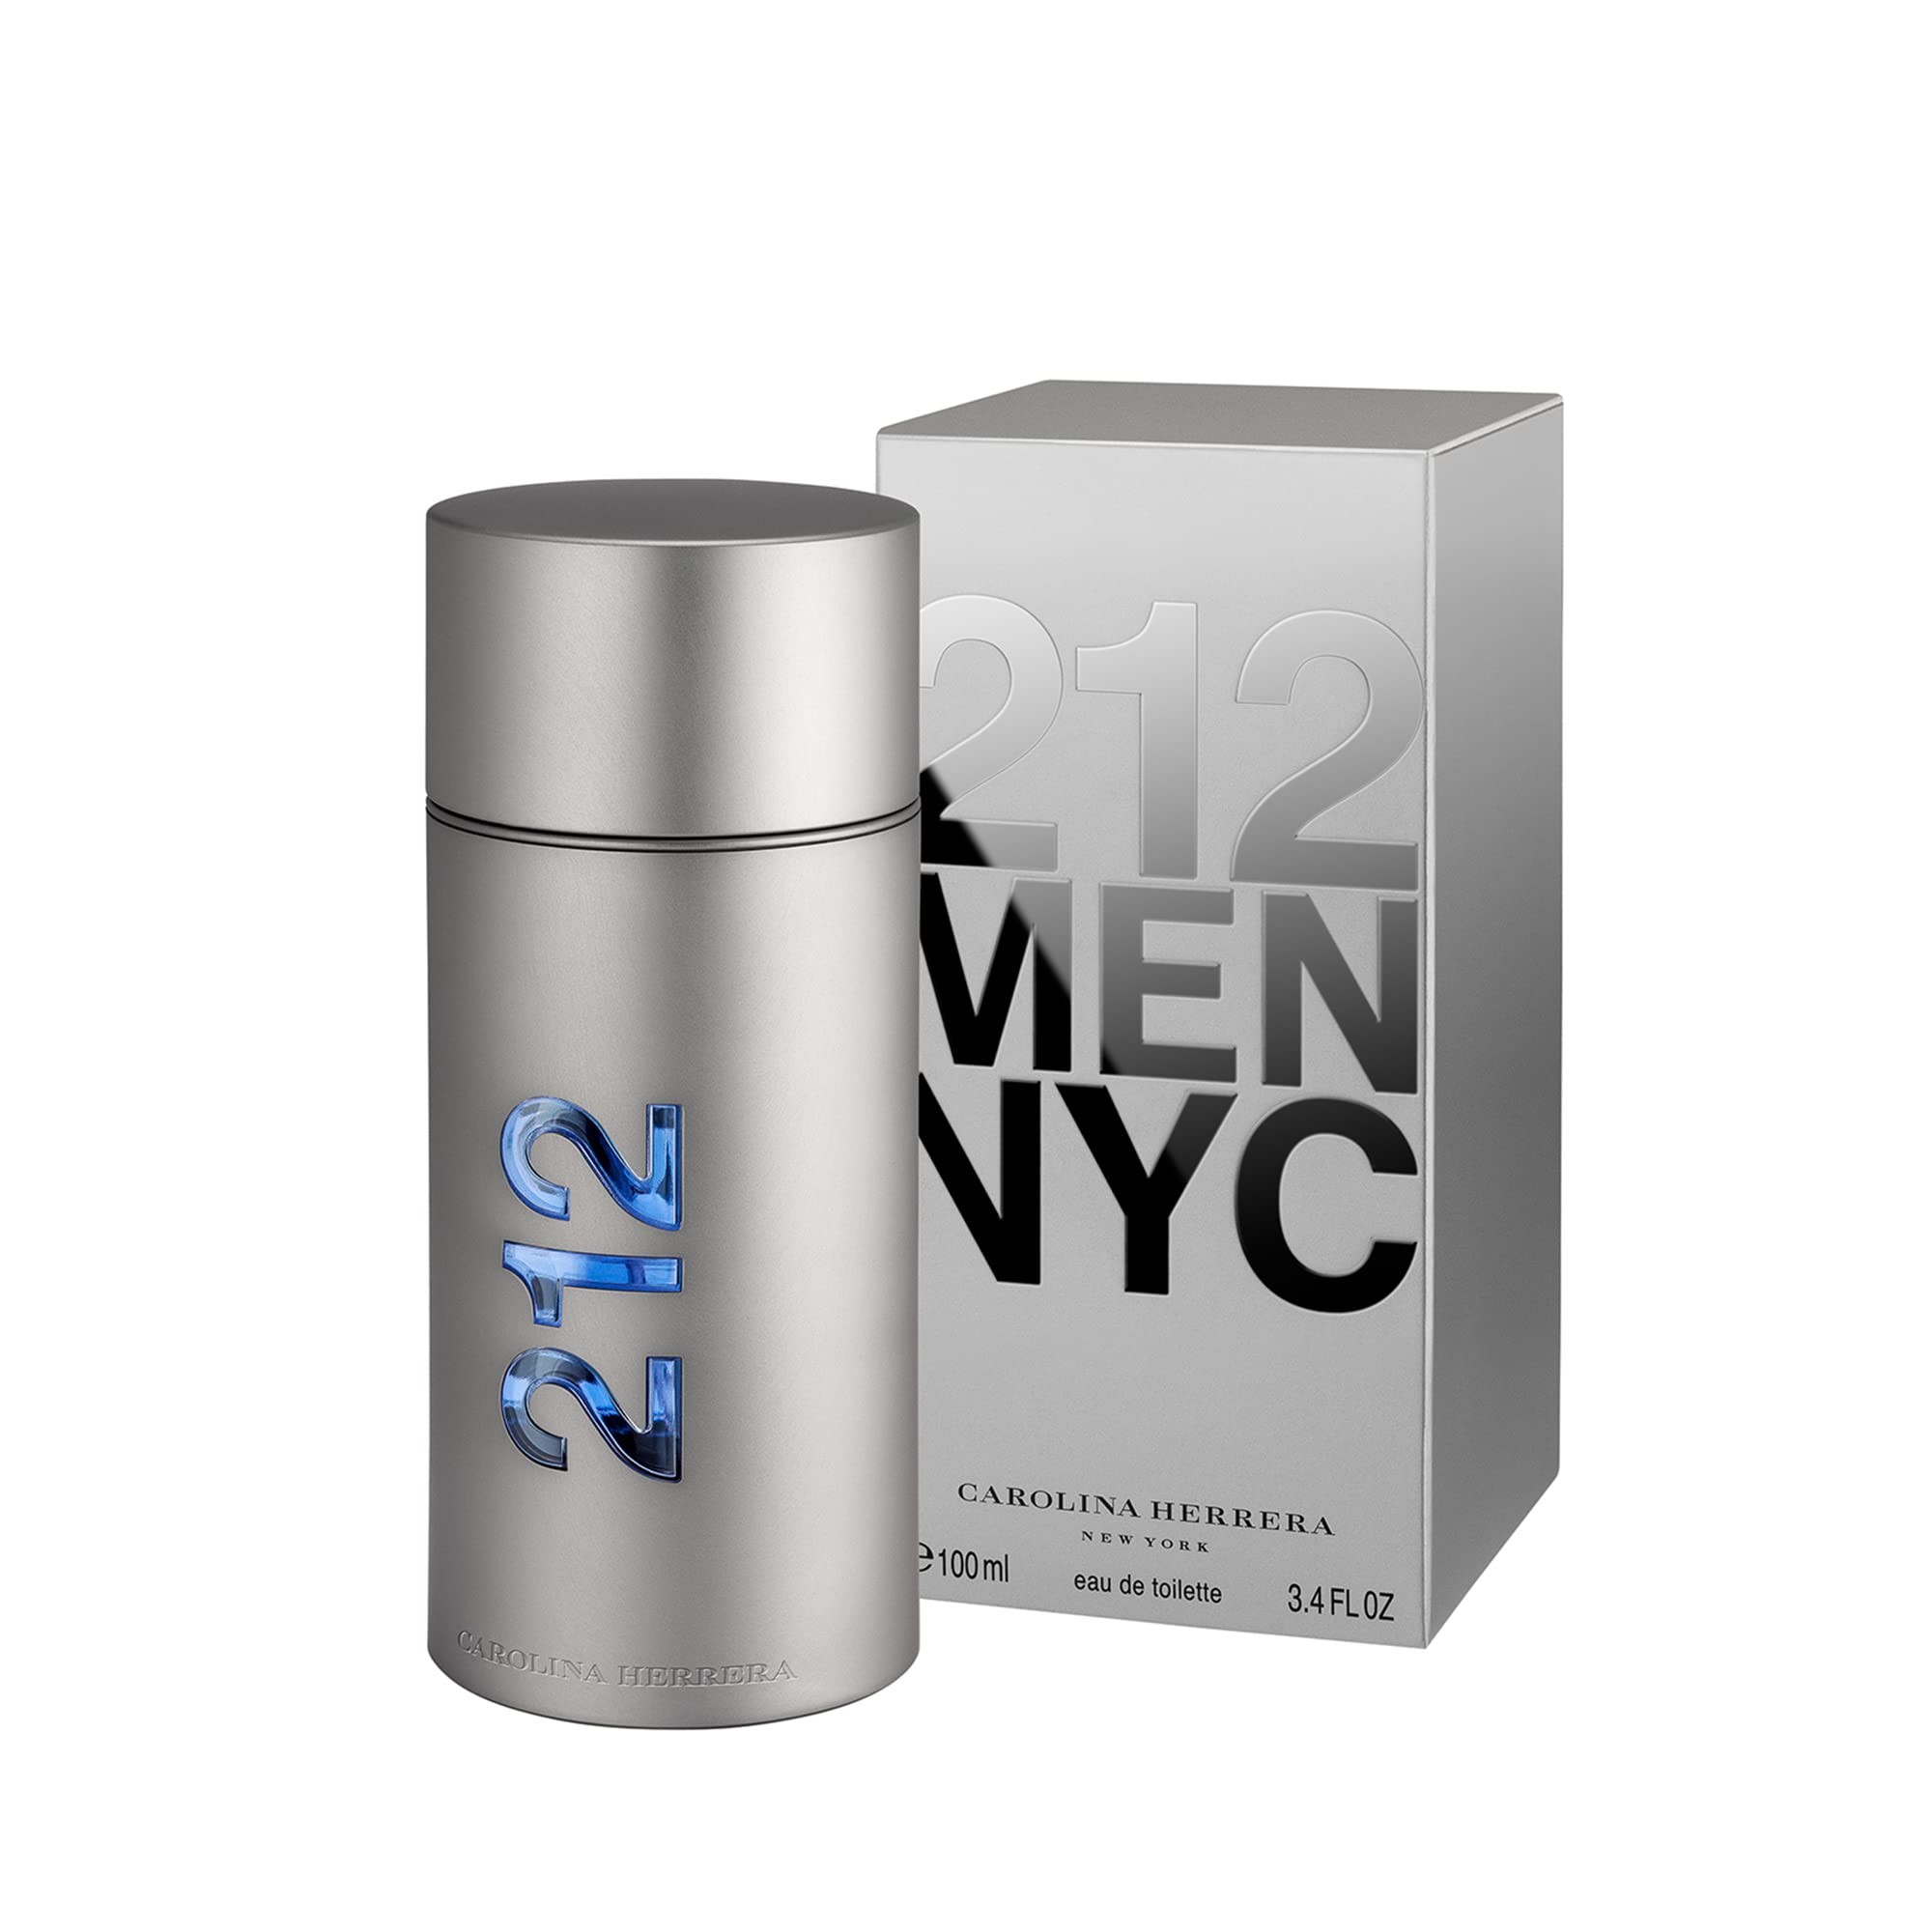 Carolina Herrera 212 Men Fragrance For Men - Timeless Scent - Warm Sandalwood - Fresh Notes - Beautifully Bright Fragrance - Energetic Green With Sensual Peppery Spices - Edt Spray - 3.4 Oz